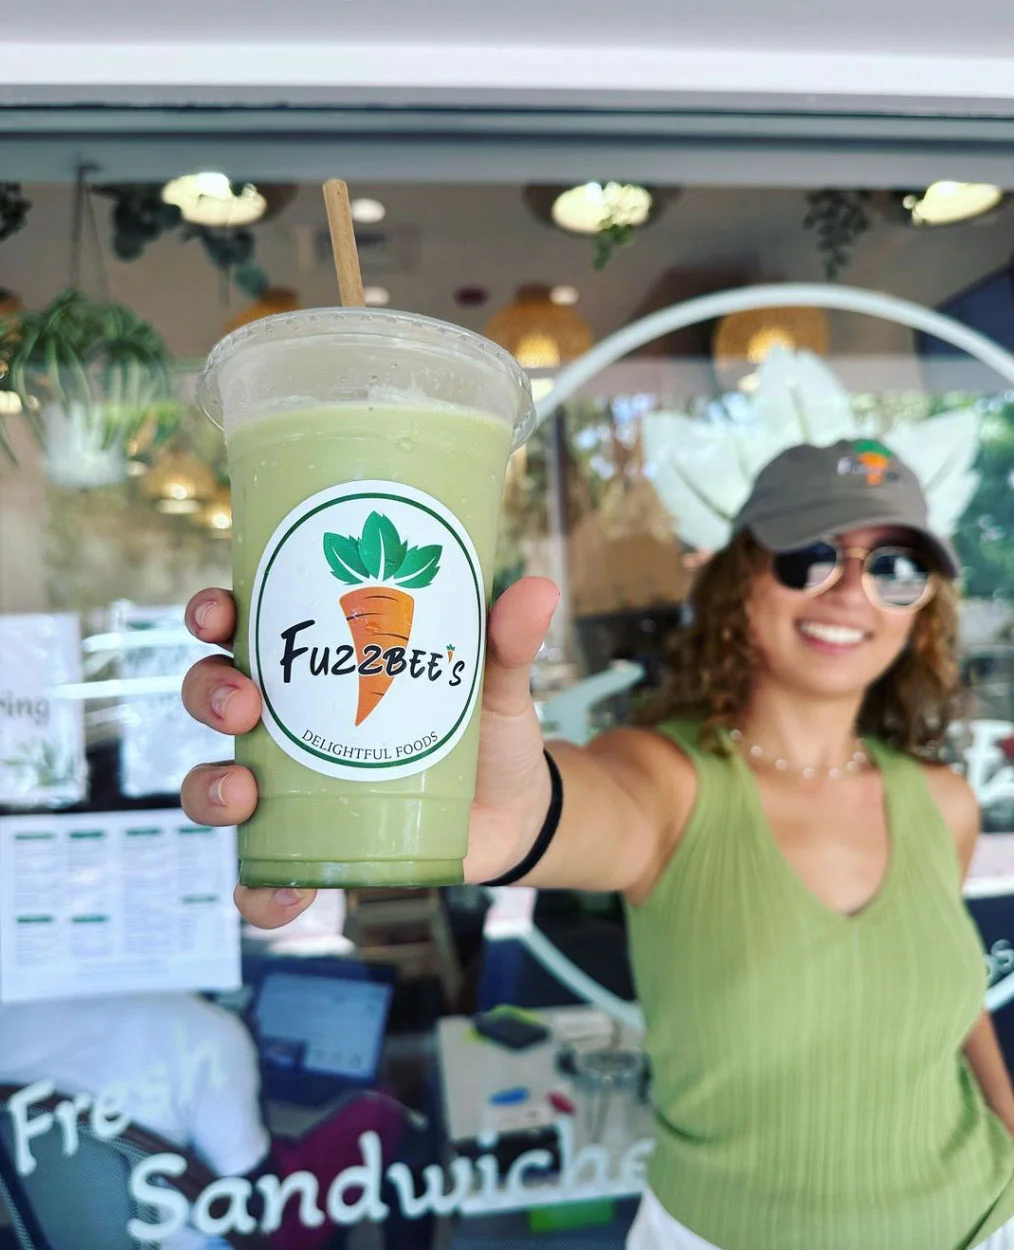 girl in green basebal cap and green tank top holds a fruit smoothee in a cup with a Fuzzbee's carrot logo